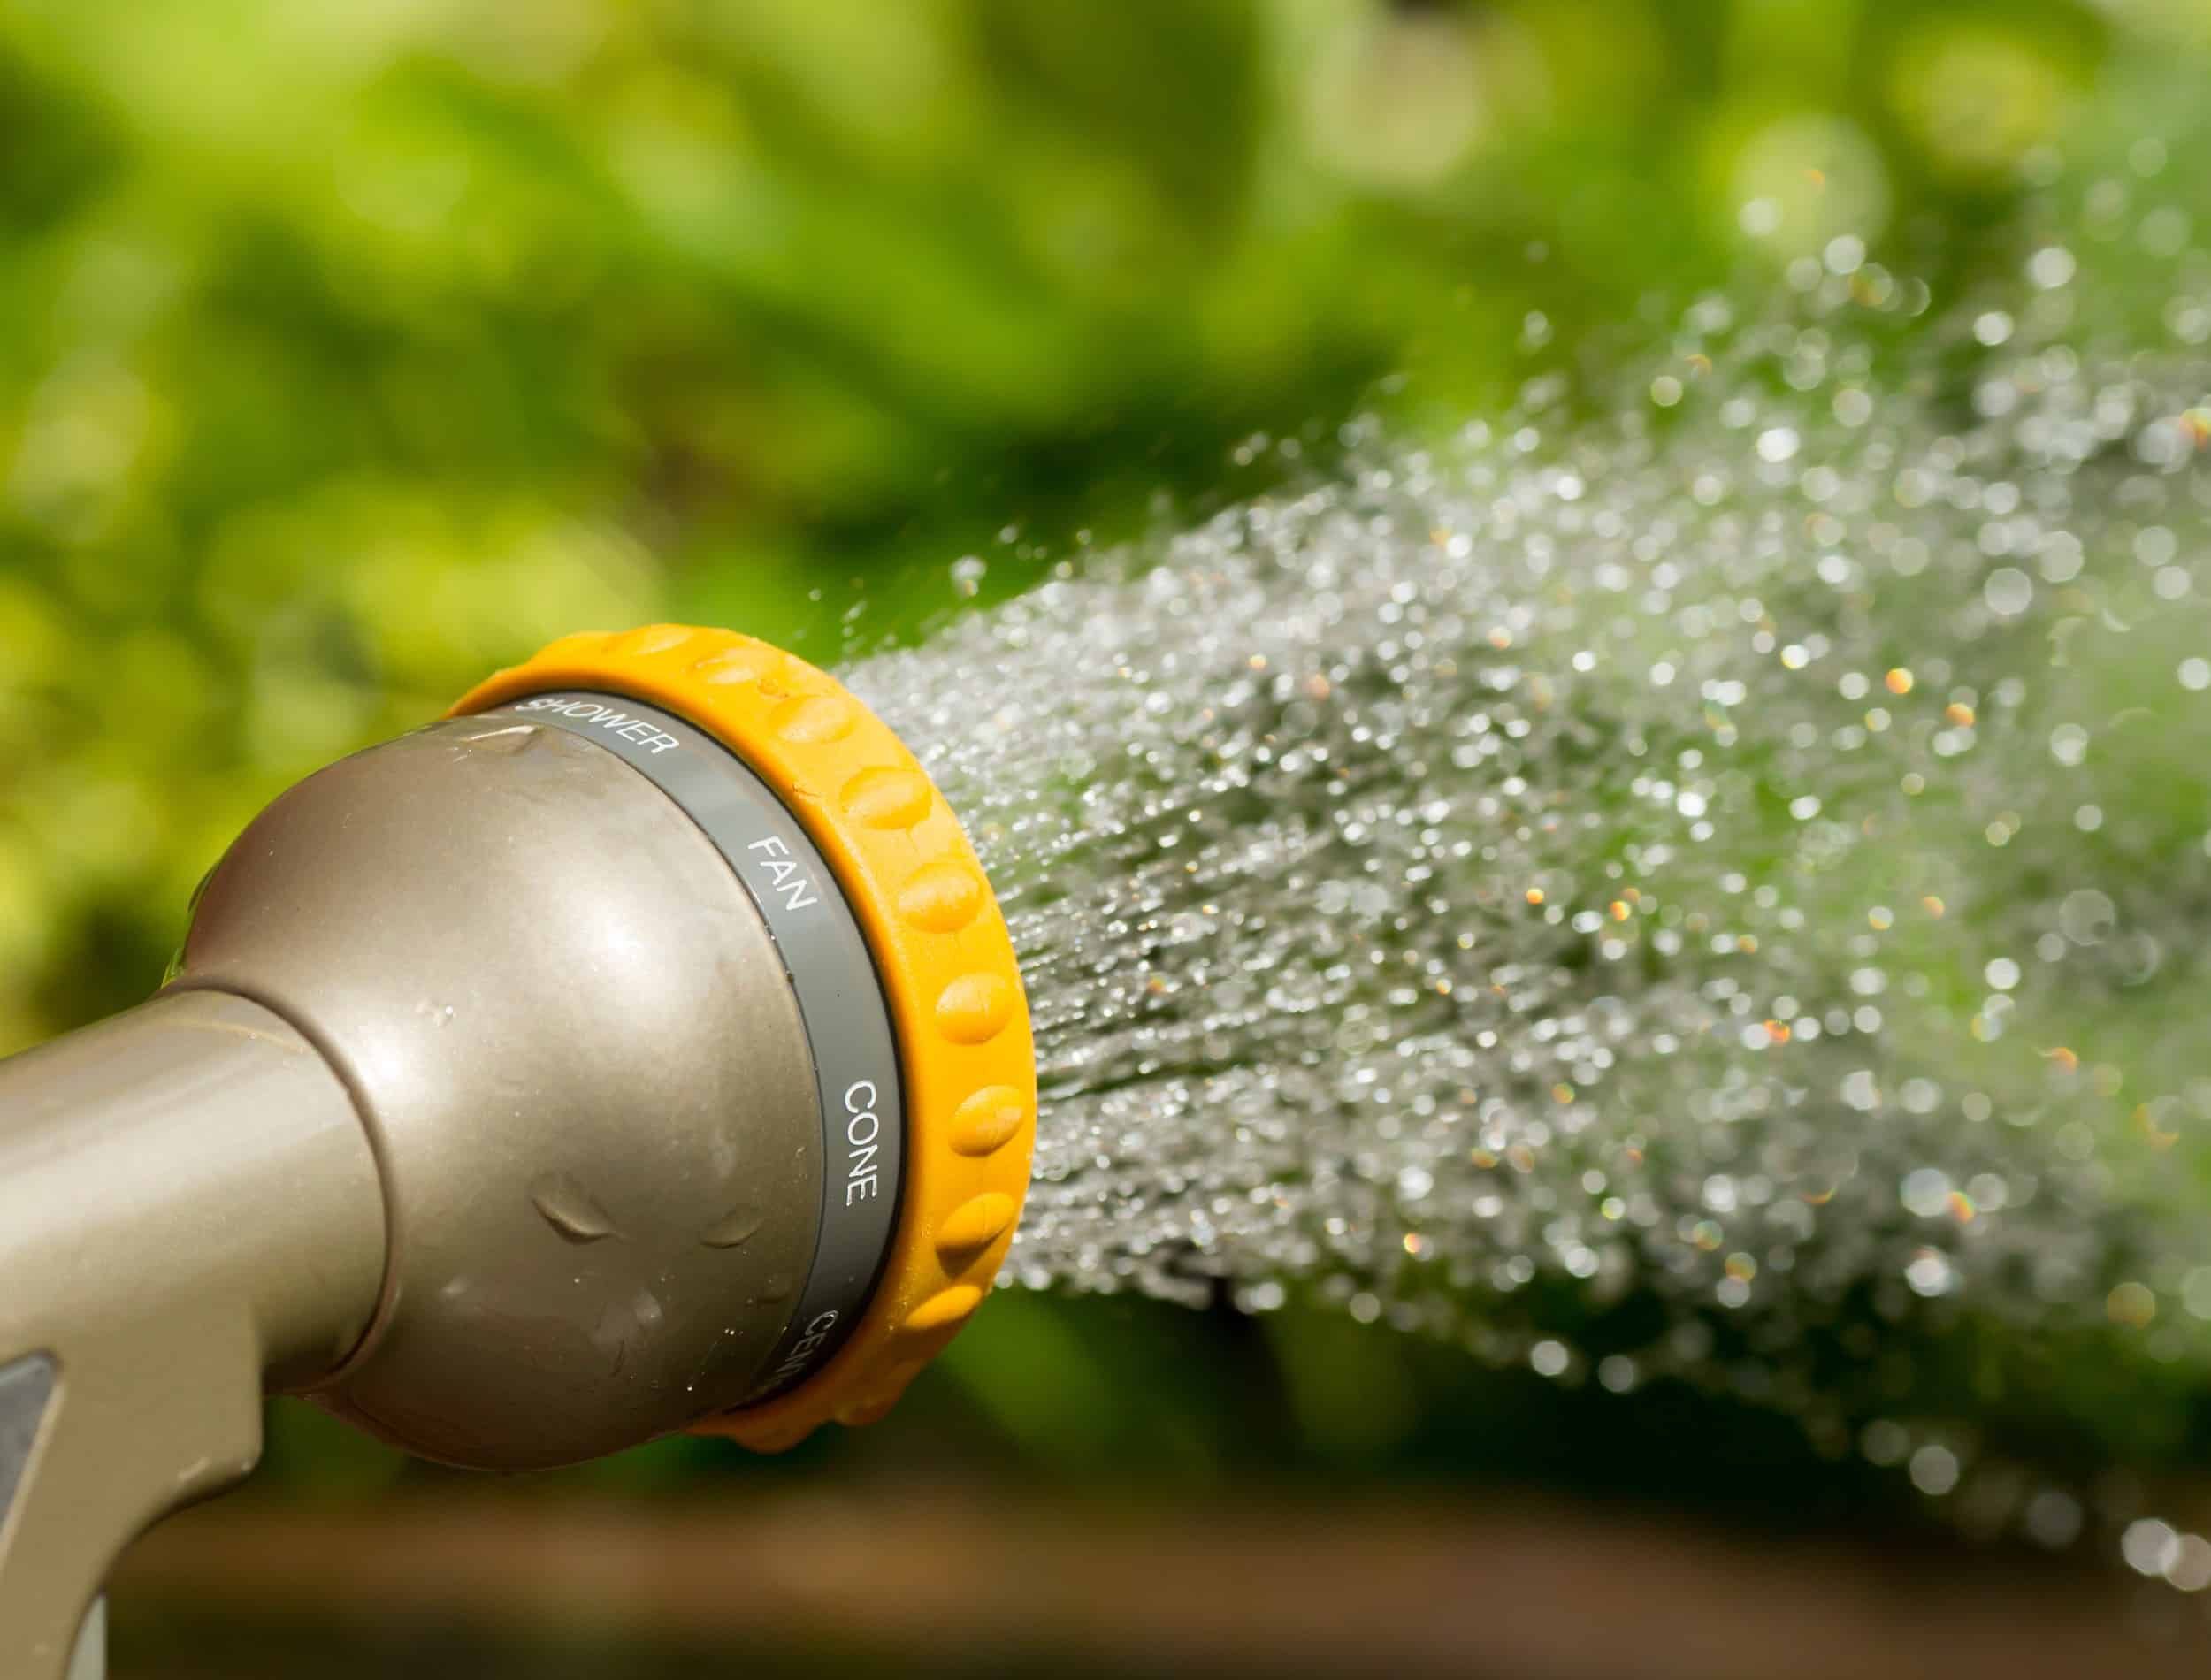 Hose nozzle spraying water on plants outdoors on a sunny day.